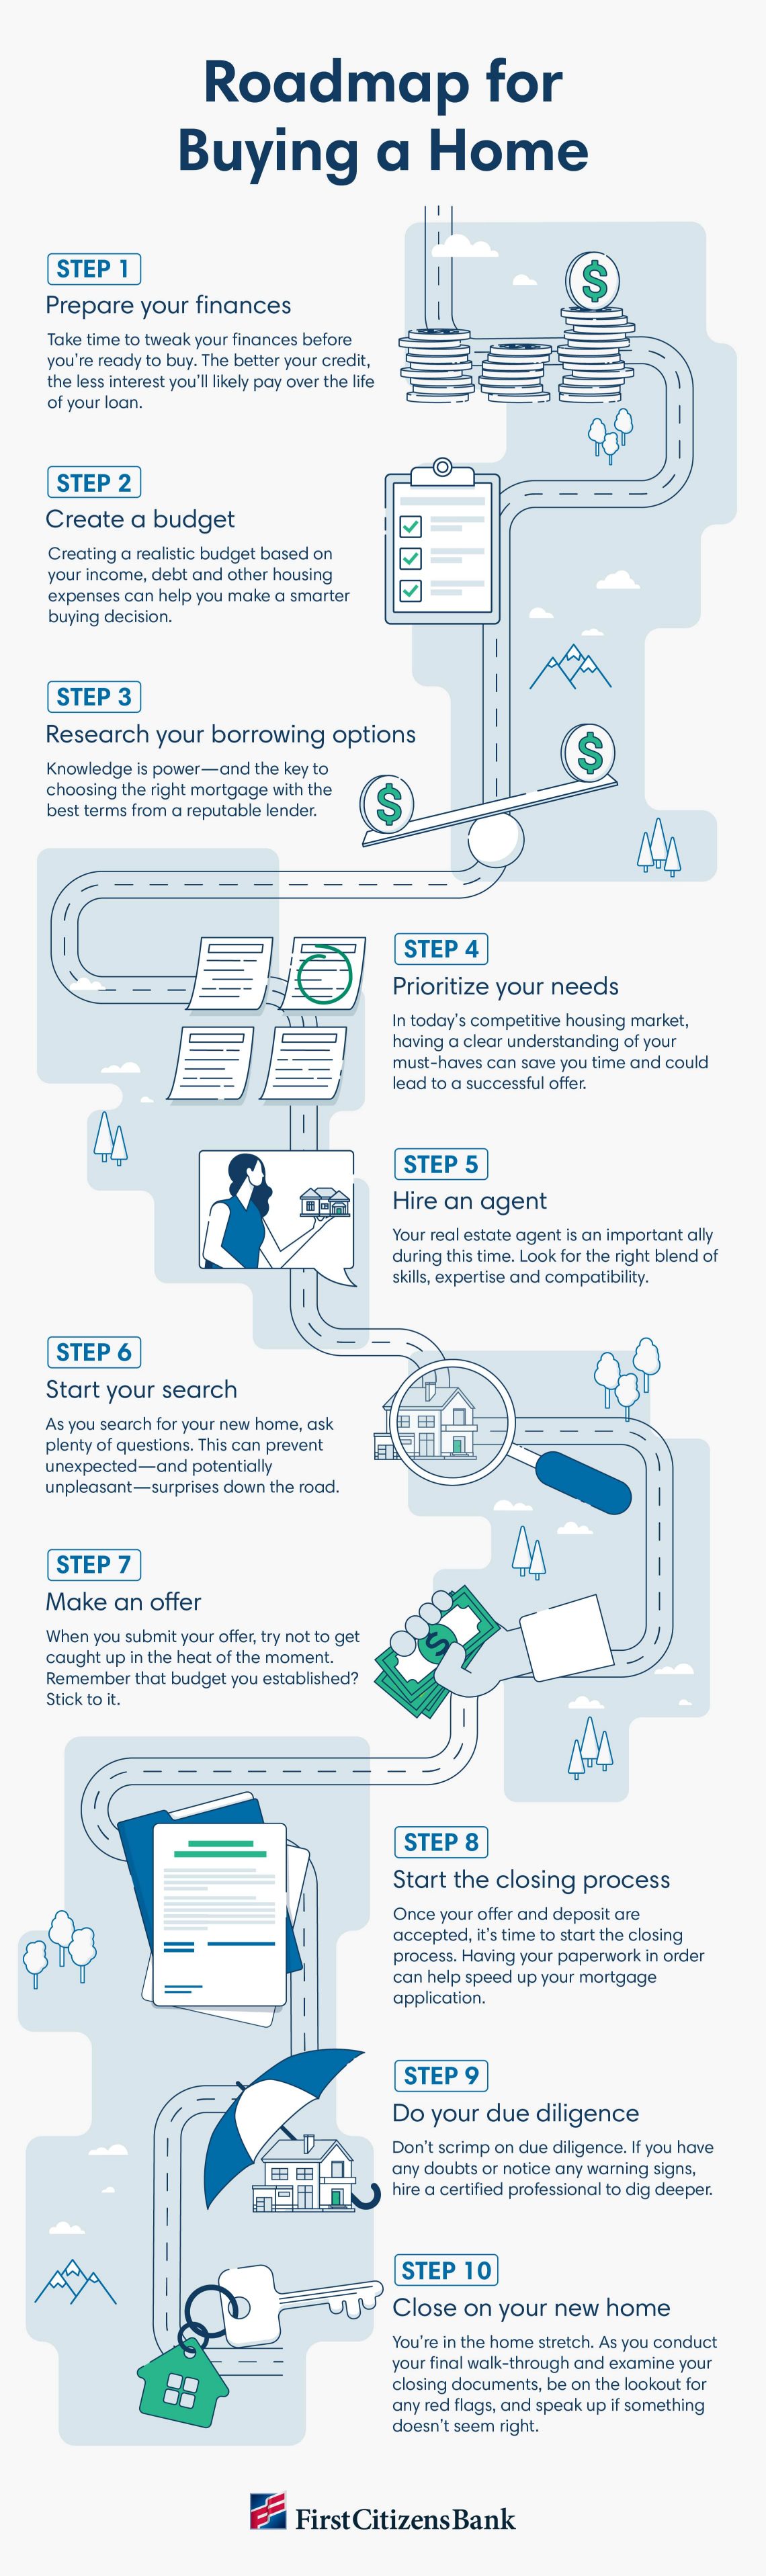 Infographic depicting the 10 steps involved with buying a home